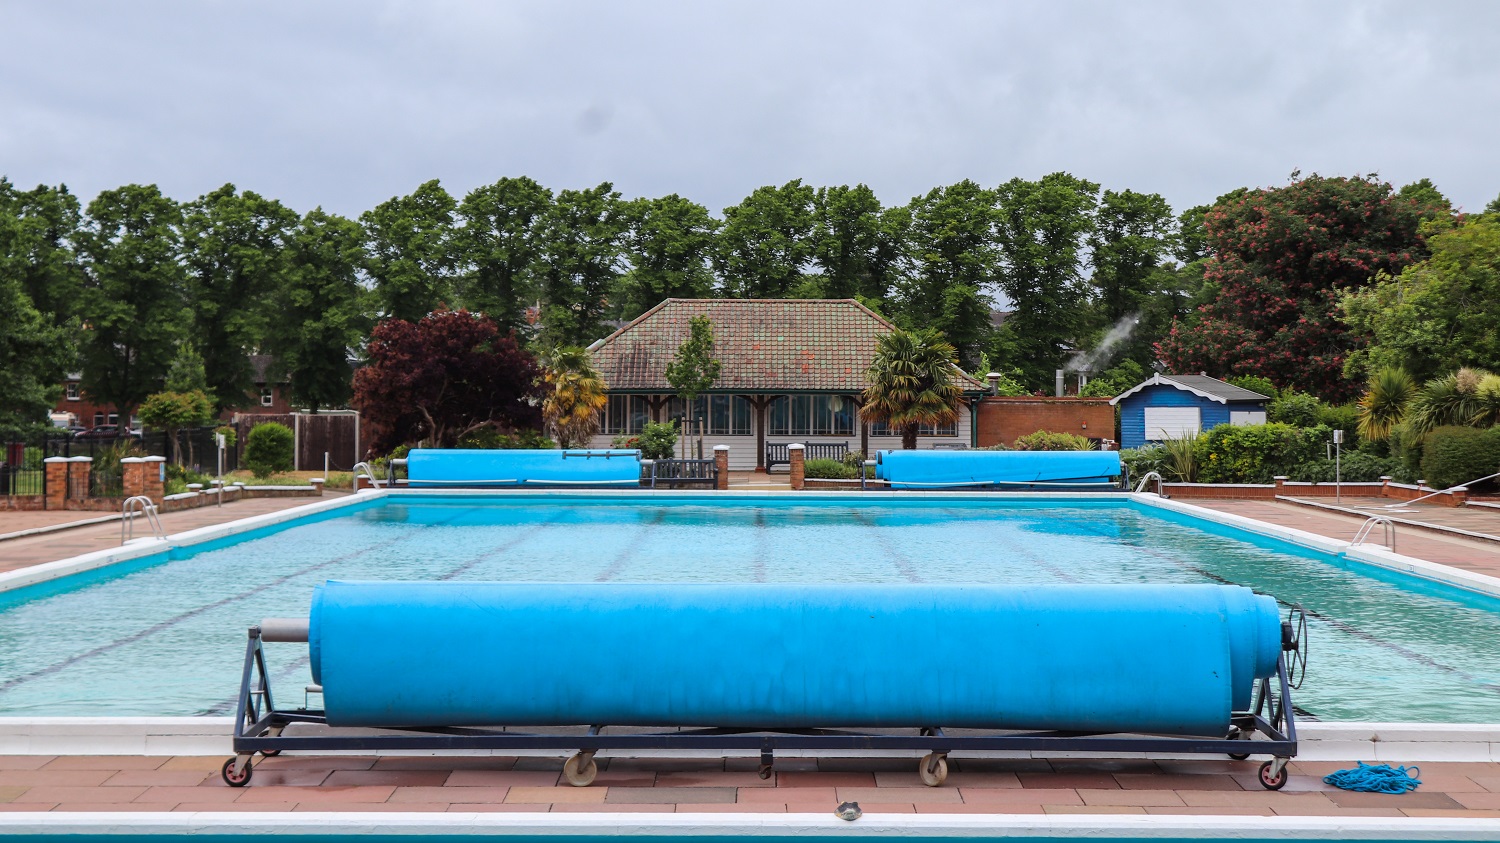 Hitchin Outdoor Pool